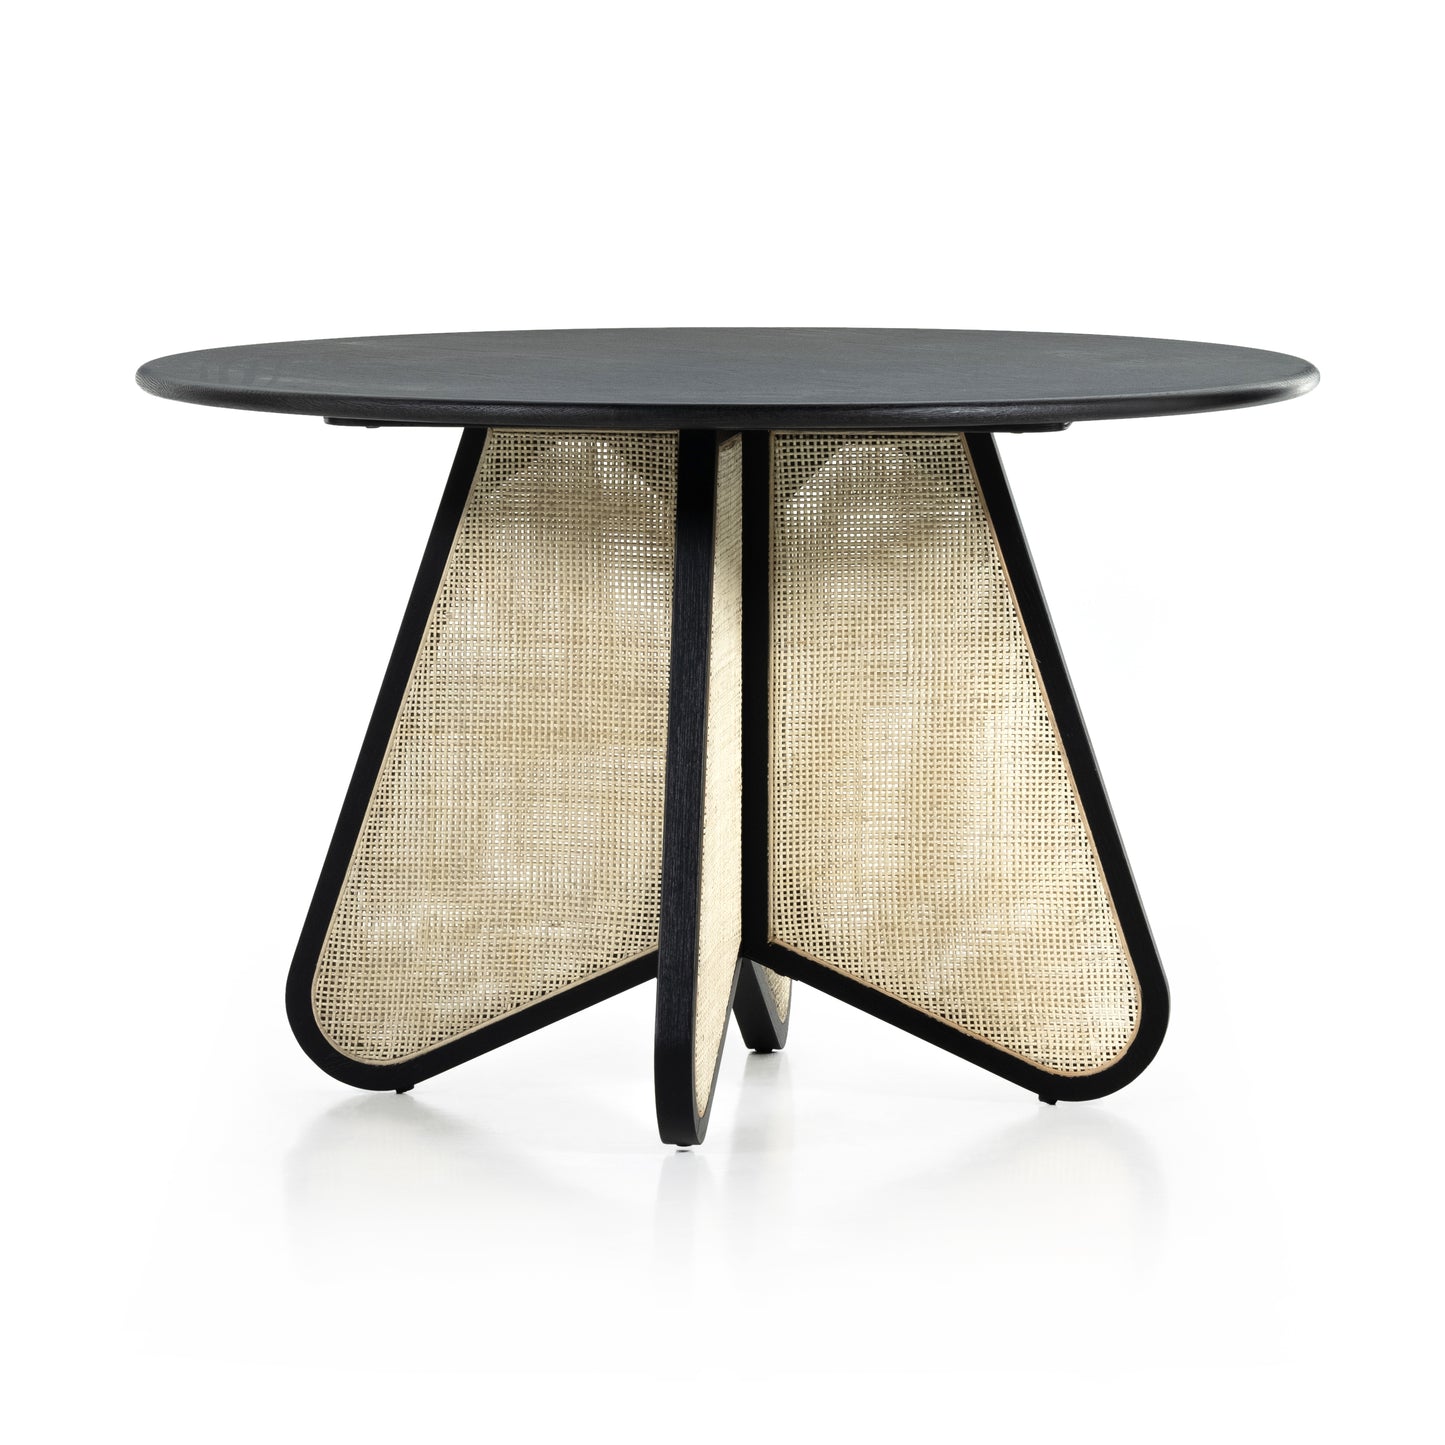 Irene Round Dining Table-Brushed Ebony Dining Table Four Hands     Four Hands, Burke Decor, Mid Century Modern Furniture, Old Bones Furniture Company, Old Bones Co, Modern Mid Century, Designer Furniture, https://www.oldbonesco.com/